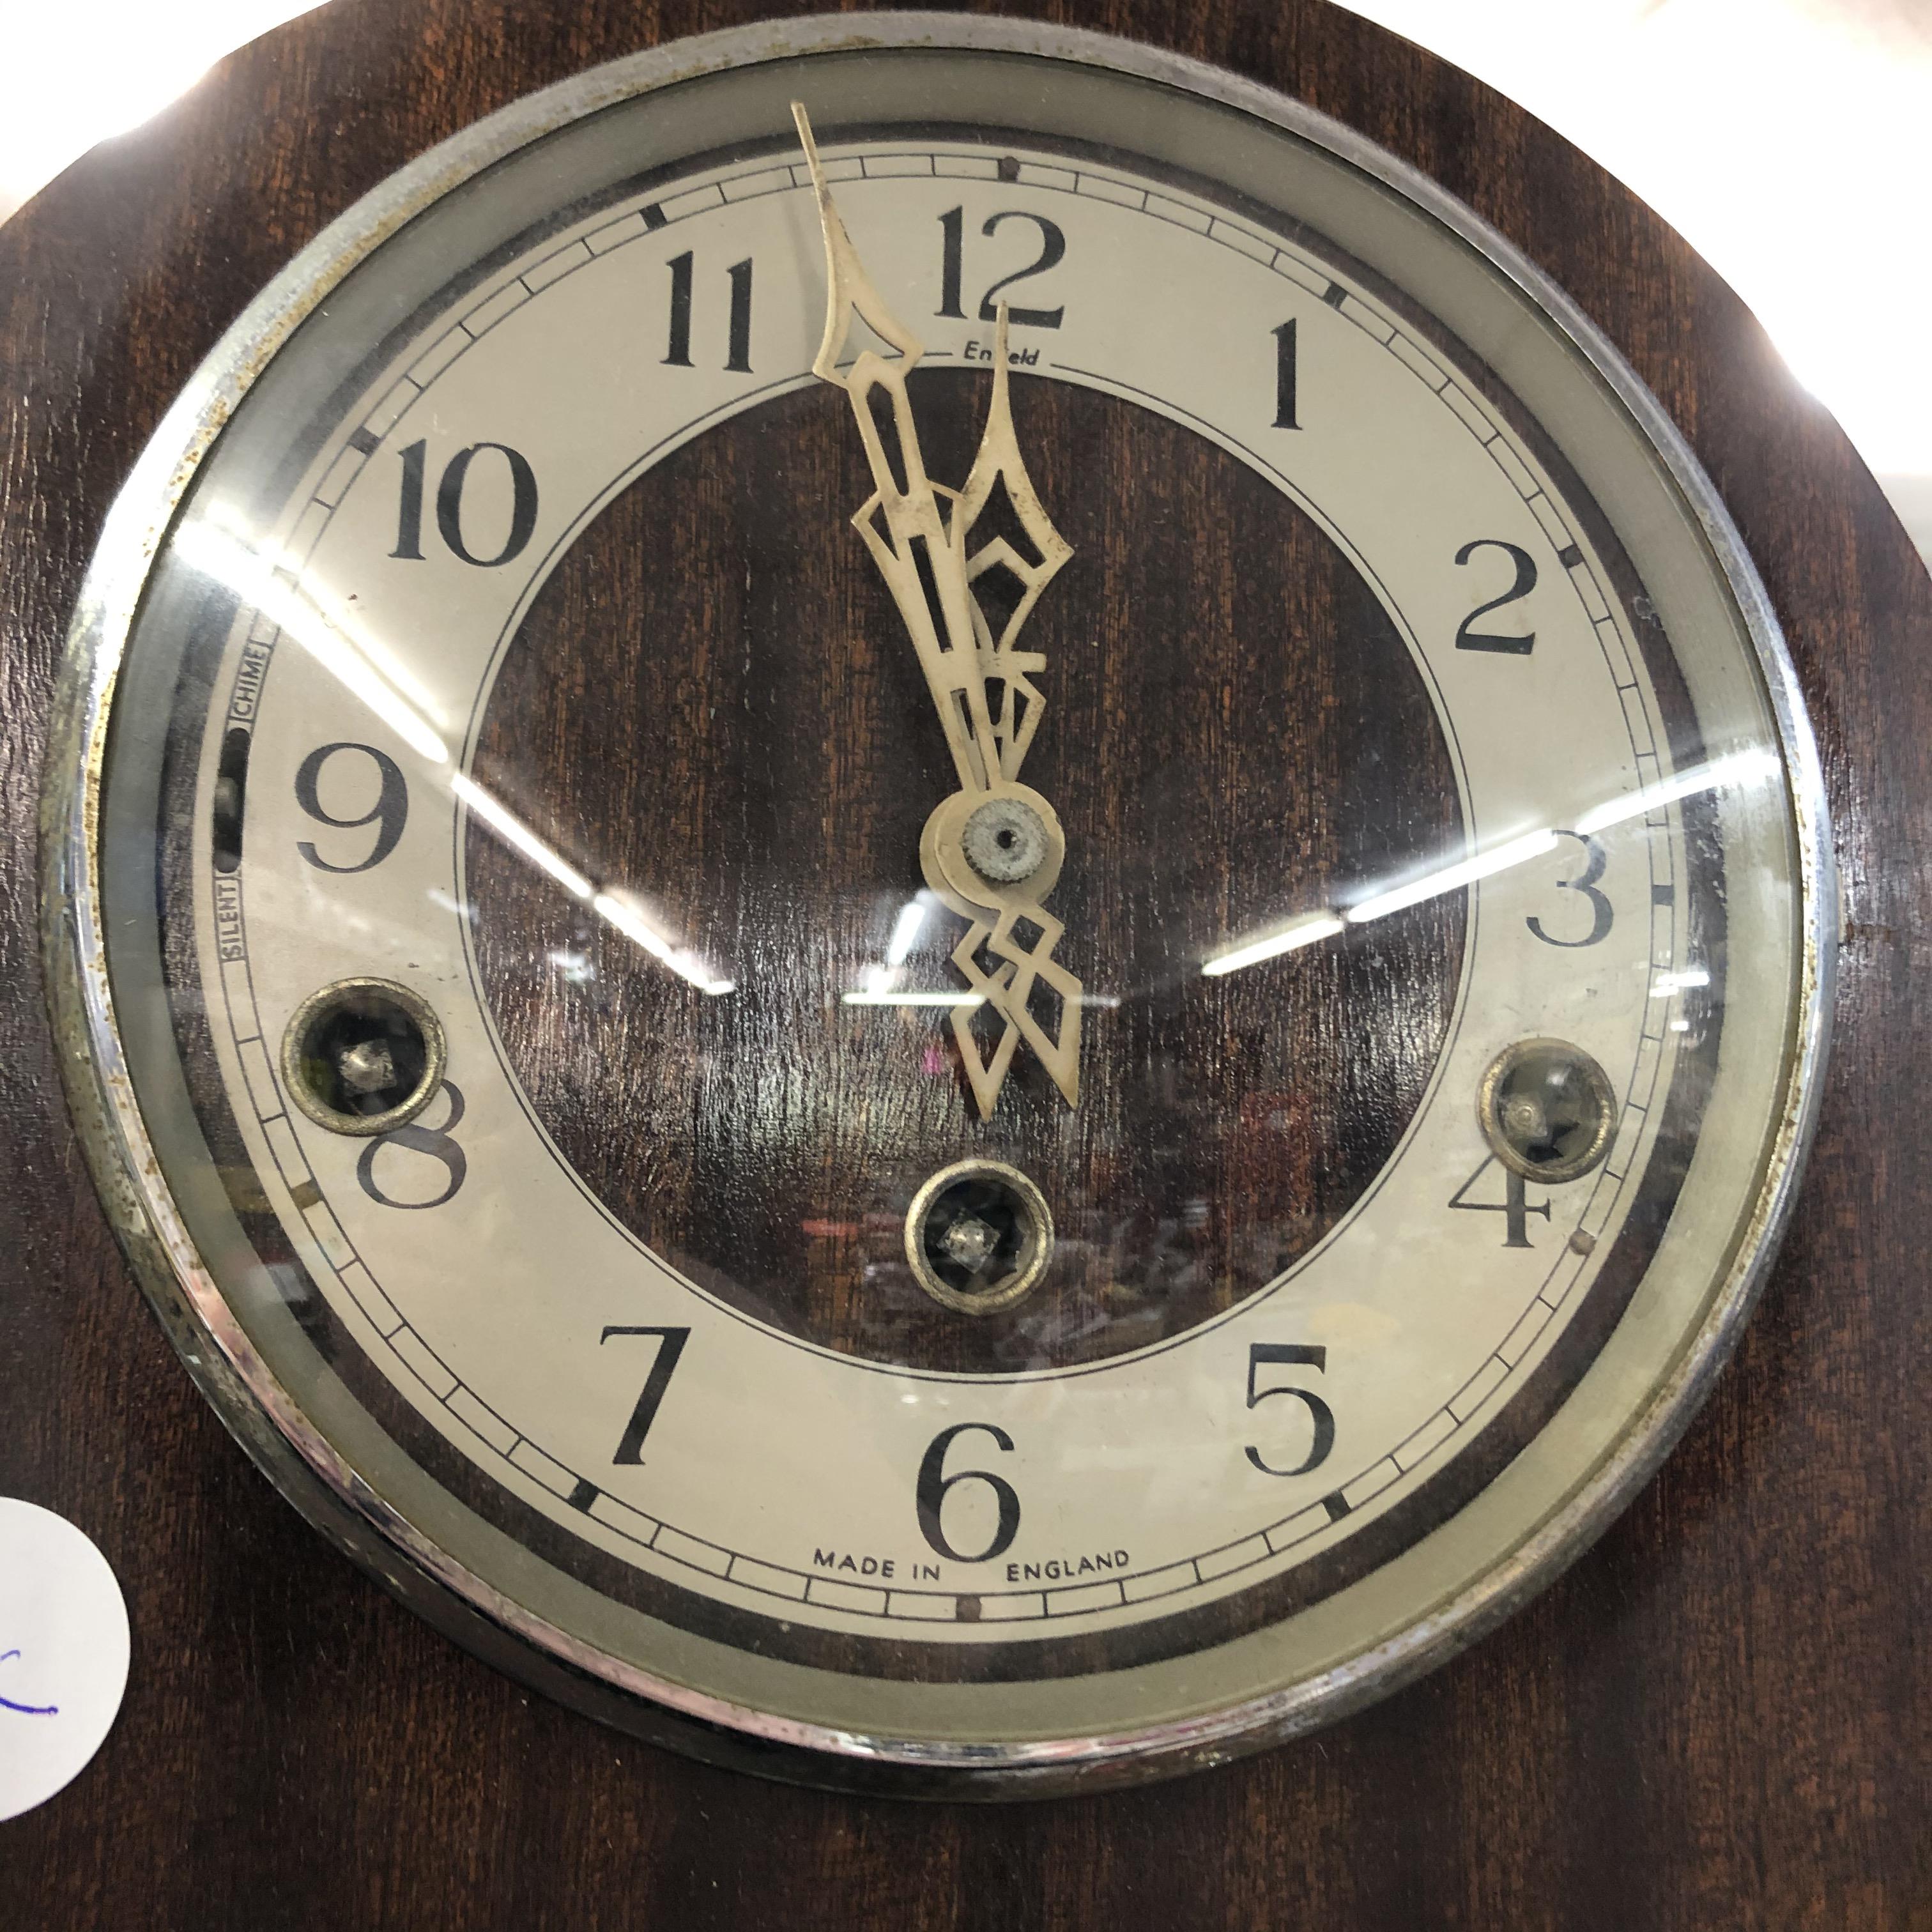 ENFIELD DOME CASED 8 DAY MANTEL CLOCK AND ONE OTHER - Image 2 of 5